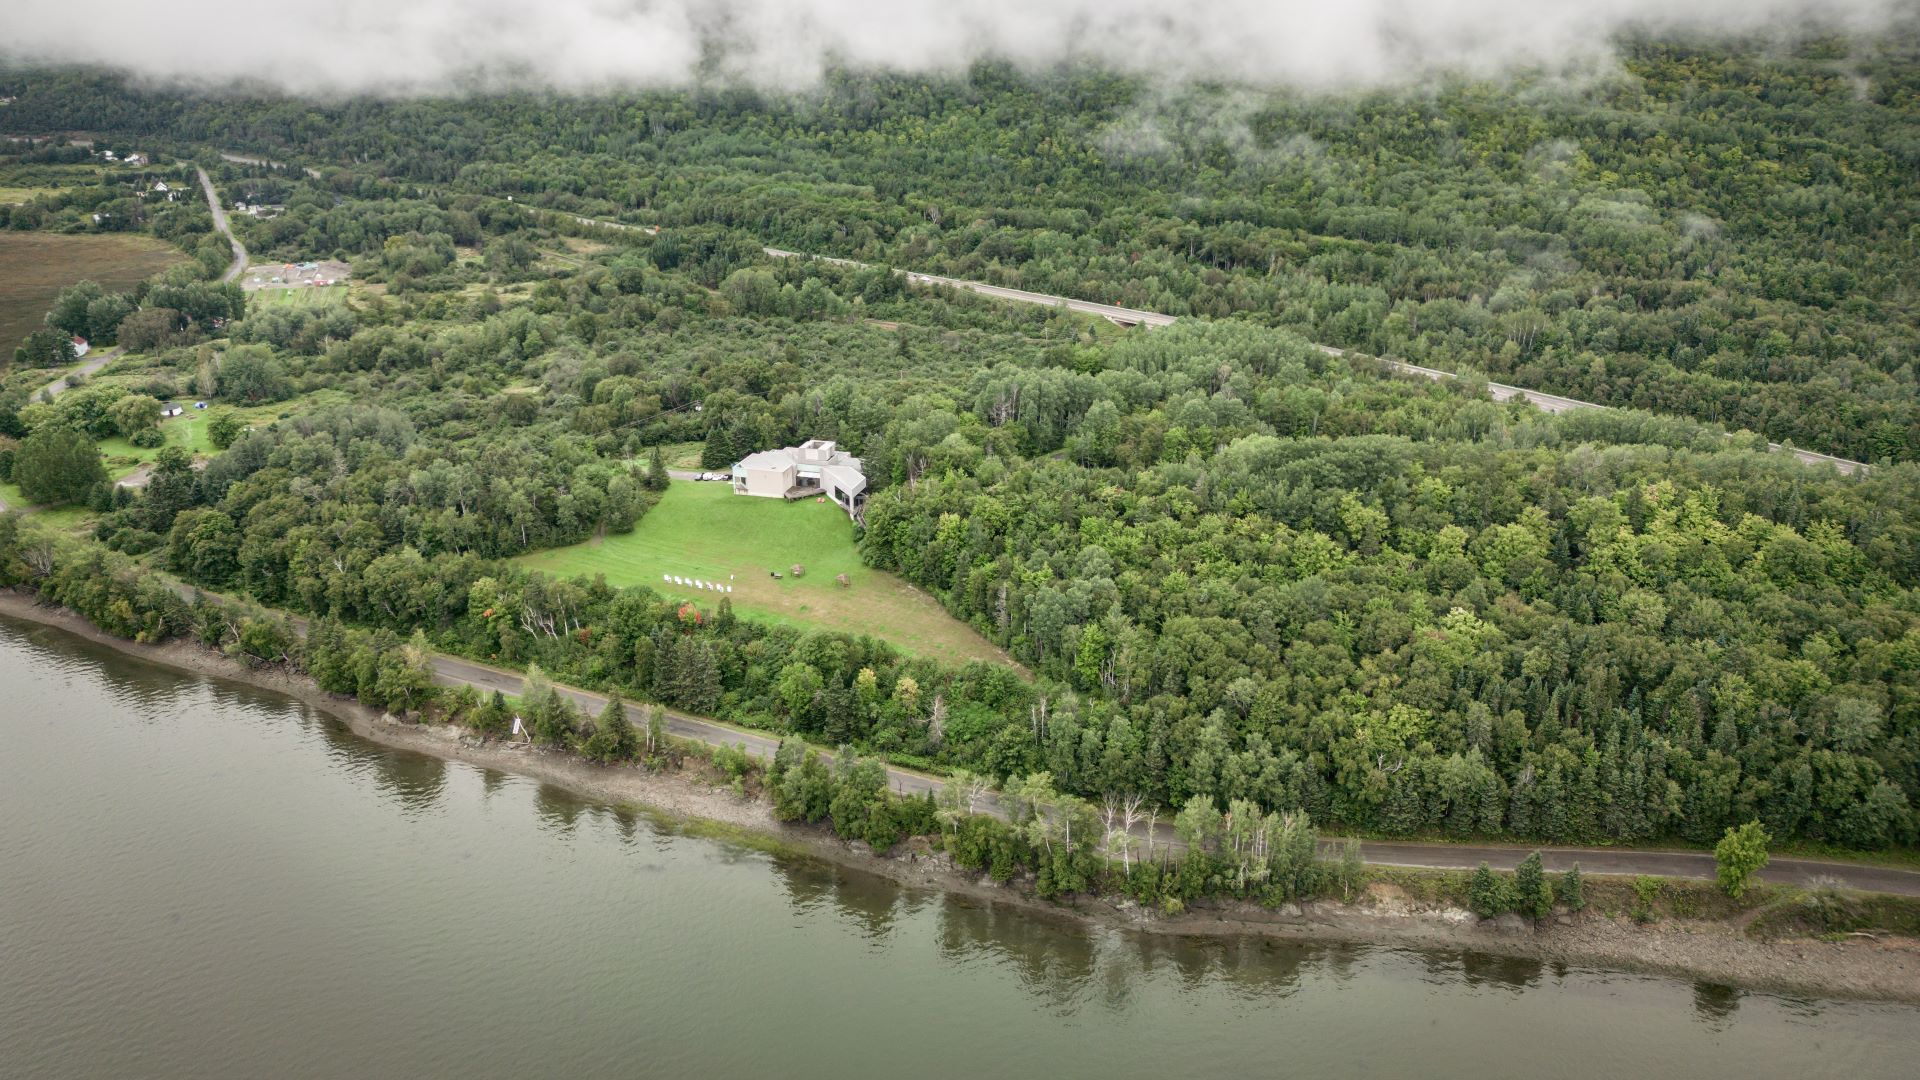 Aerial view of a building surrounded by trees next to a river.